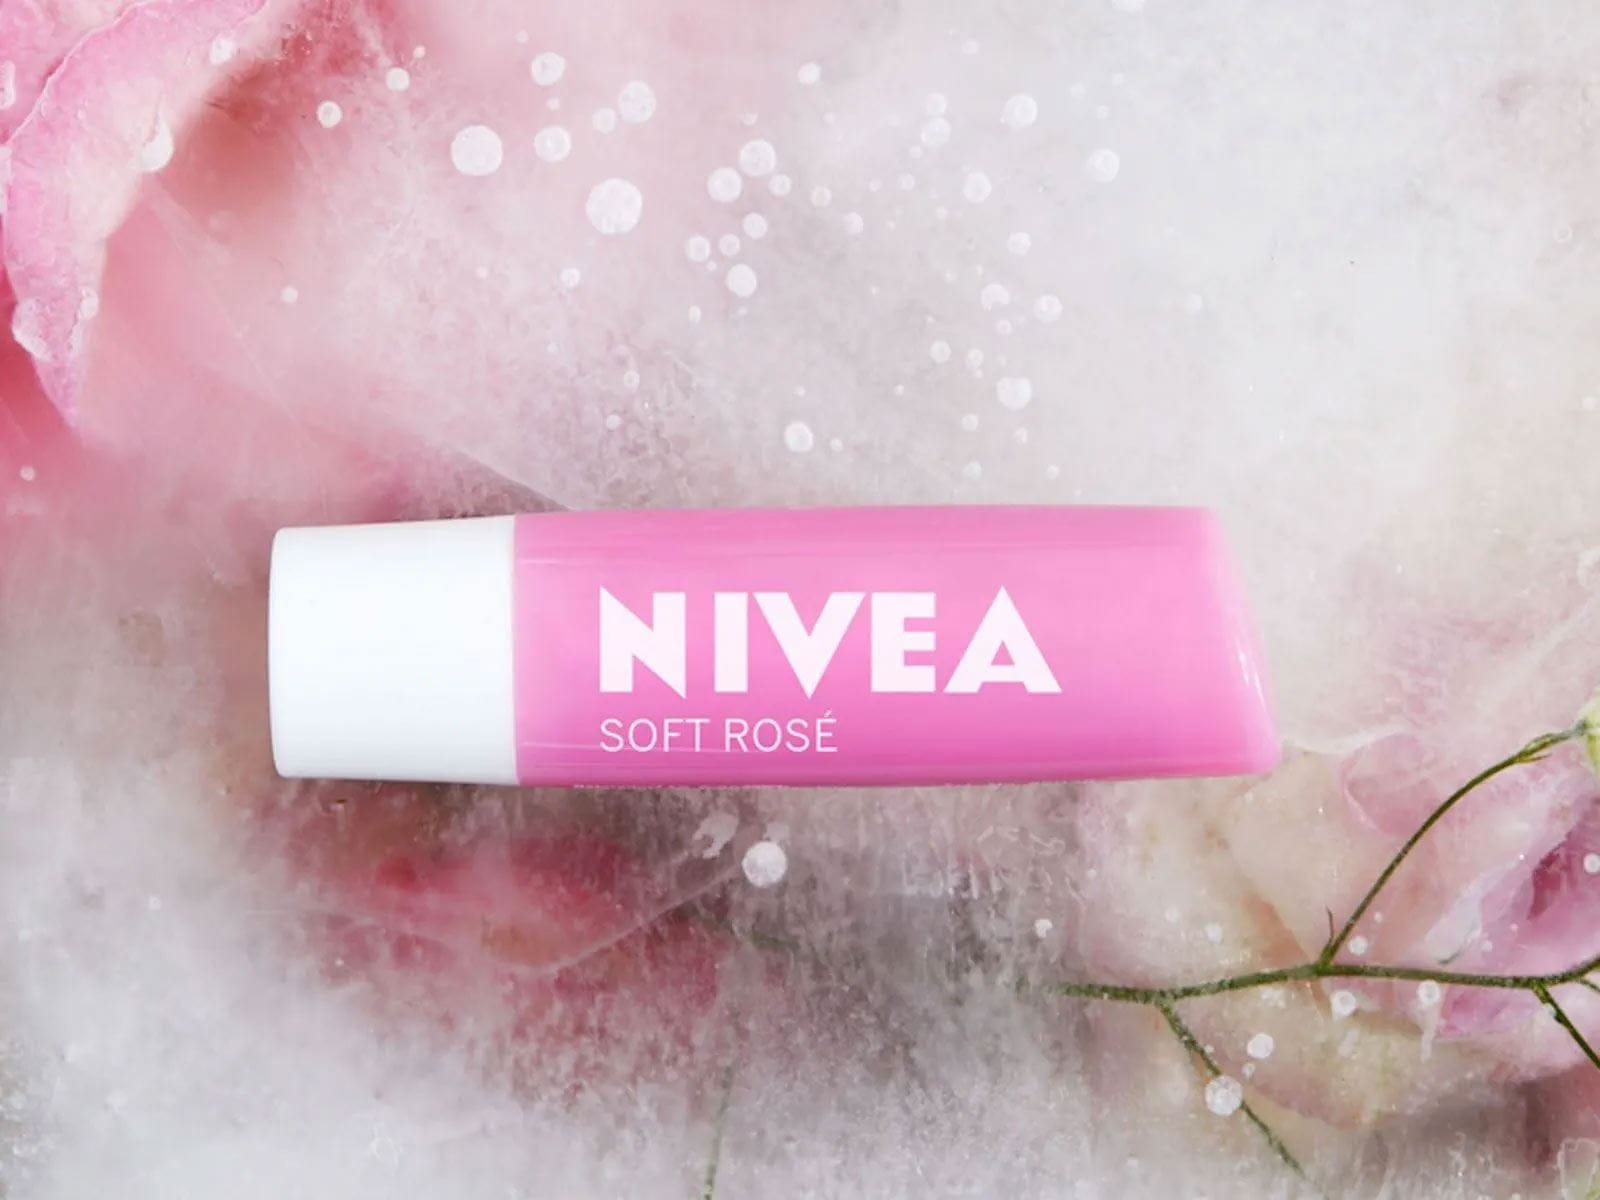 View of a Nivea Watermelon Shine Duo Lip Balm product overtop a rose petal covered background.